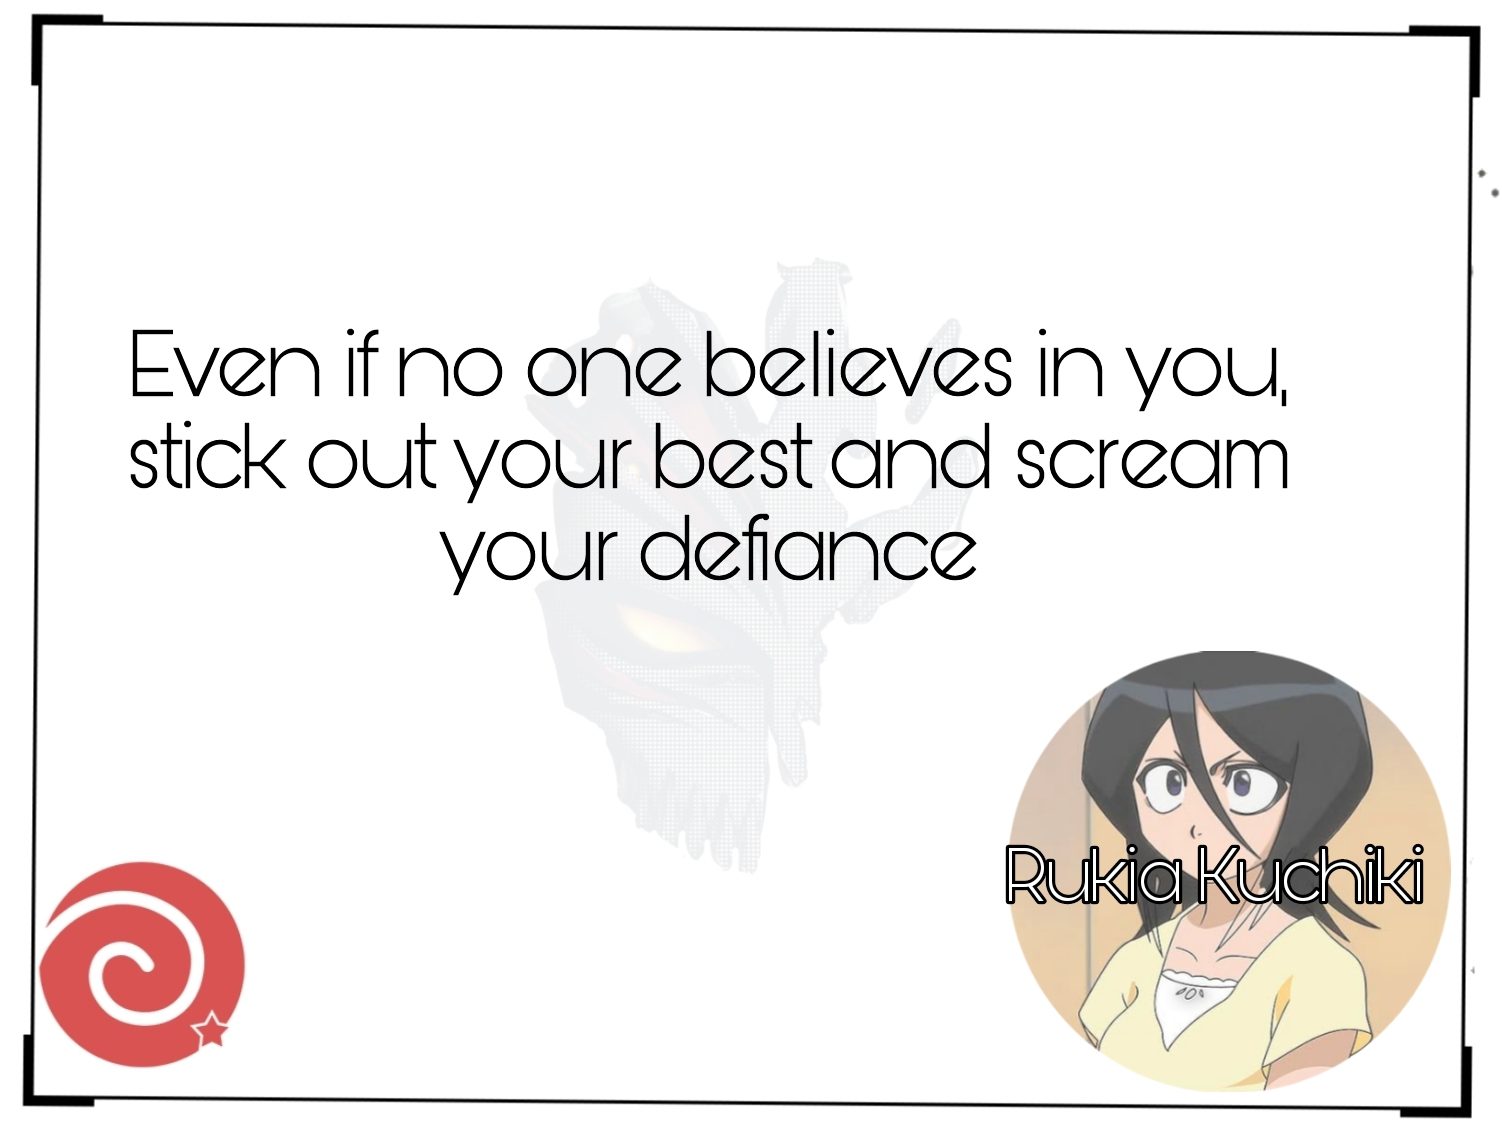 Quotes from Bleach